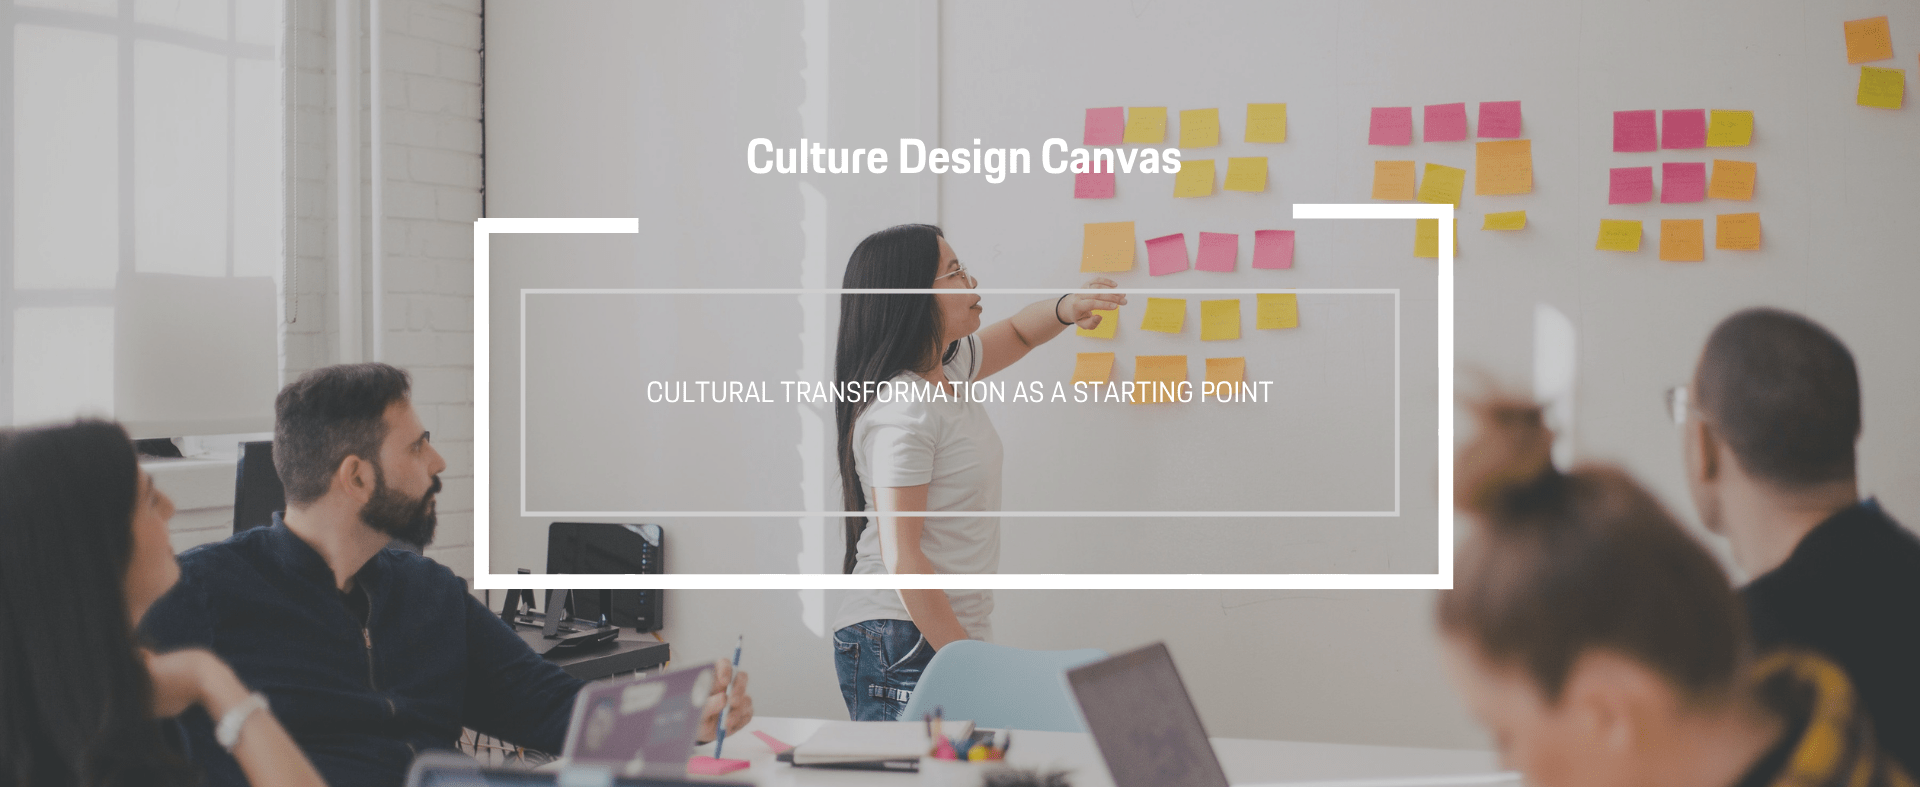 The Culture Design Canvas: Cultural transformation as a starting point.